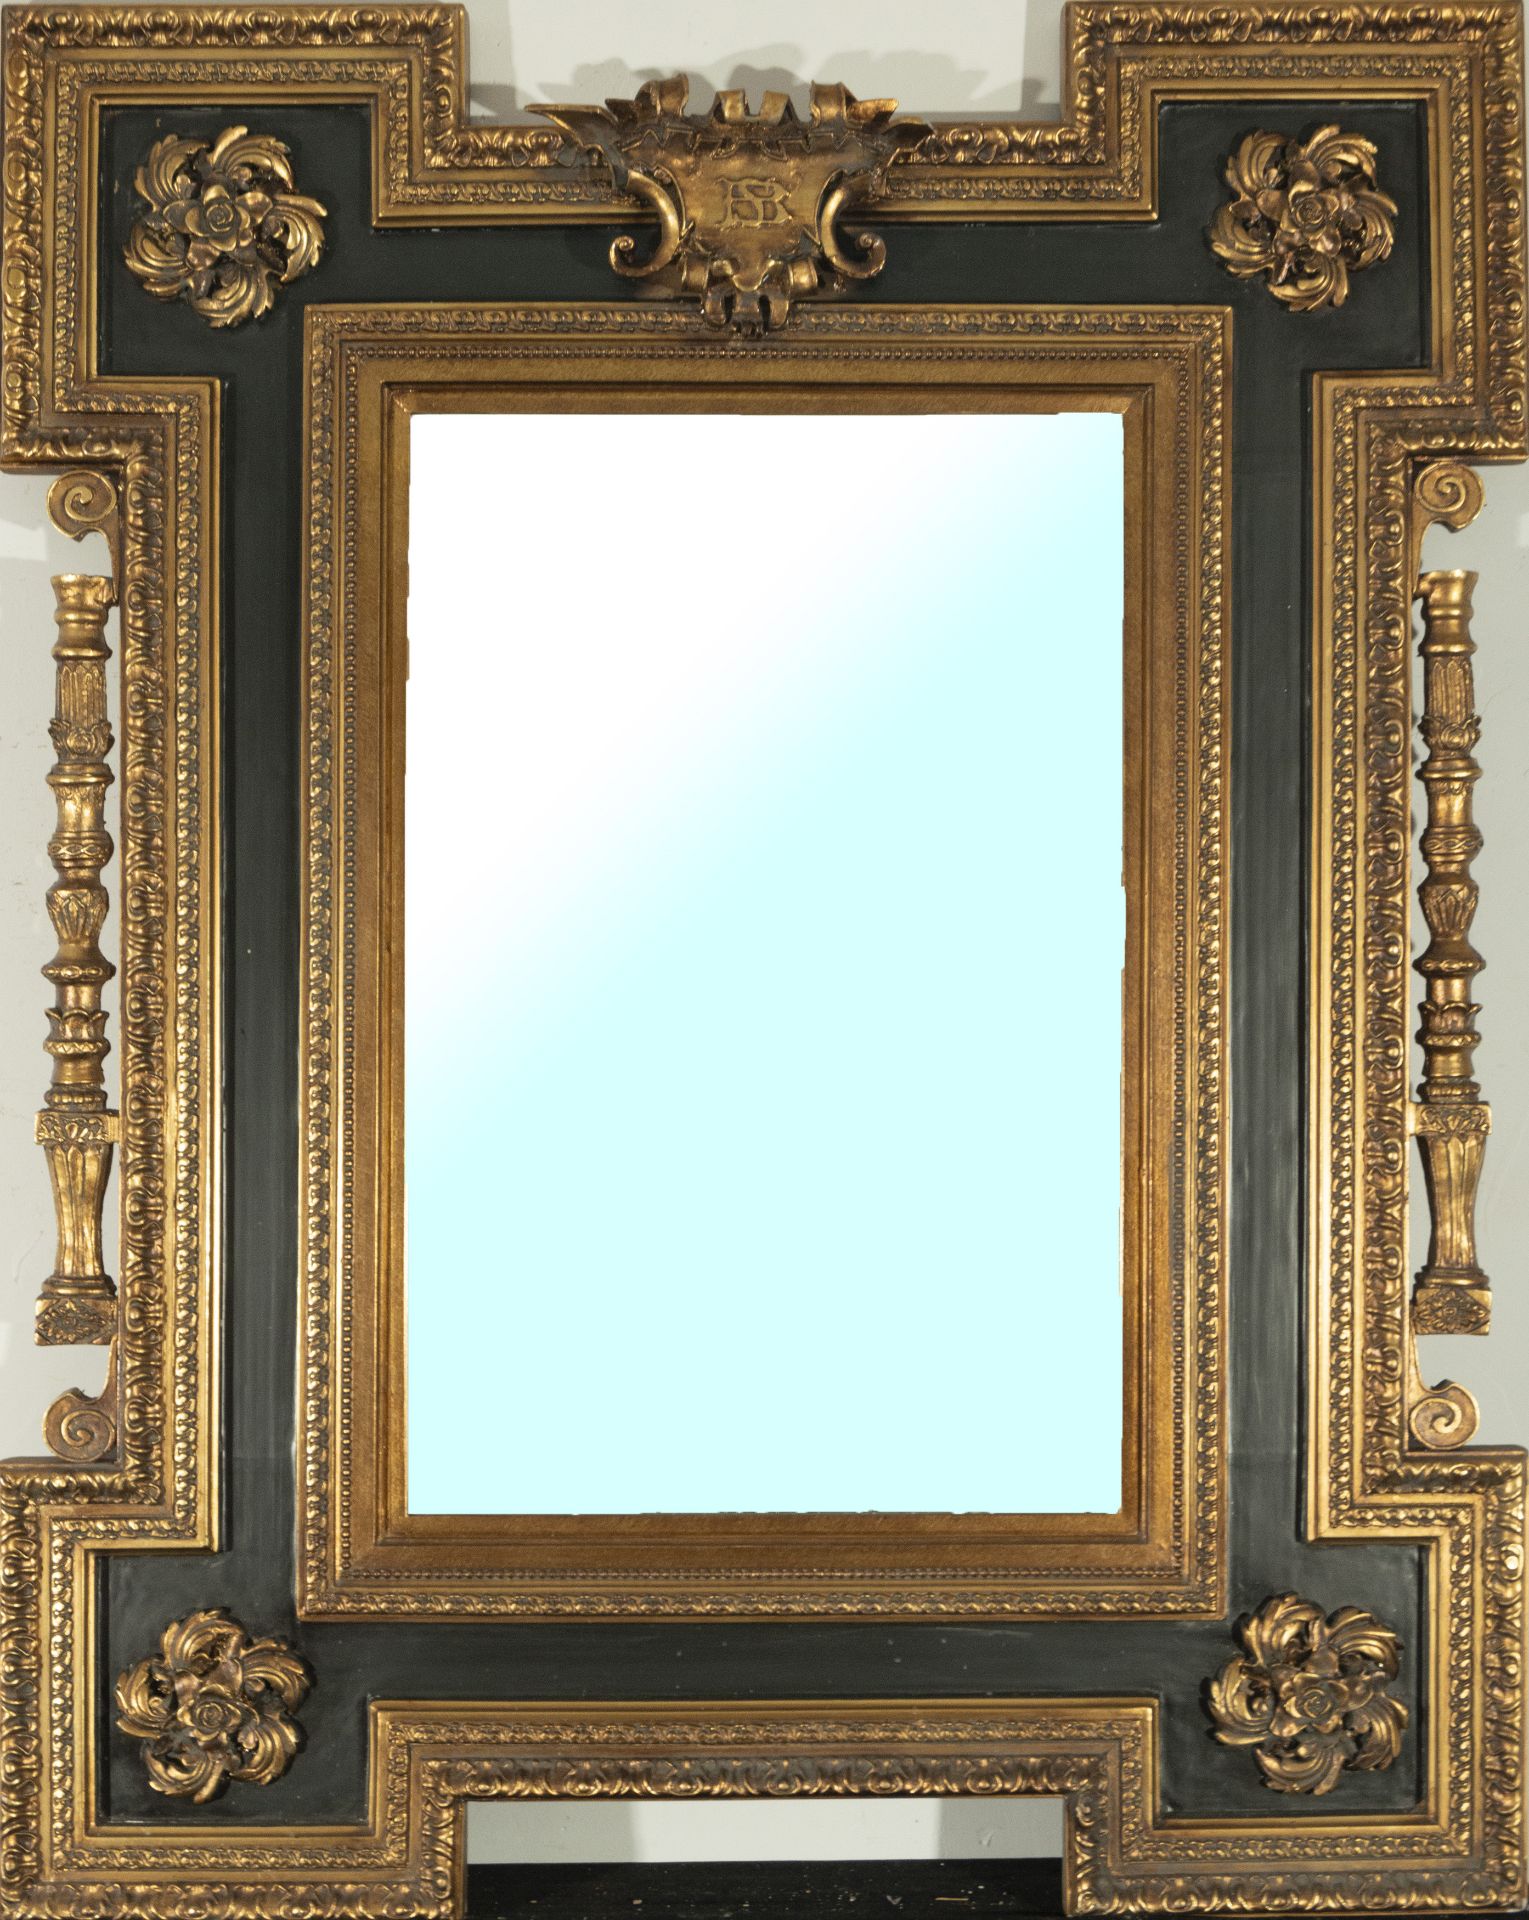 Large 19th century French mirror in gilded and ebonized wood